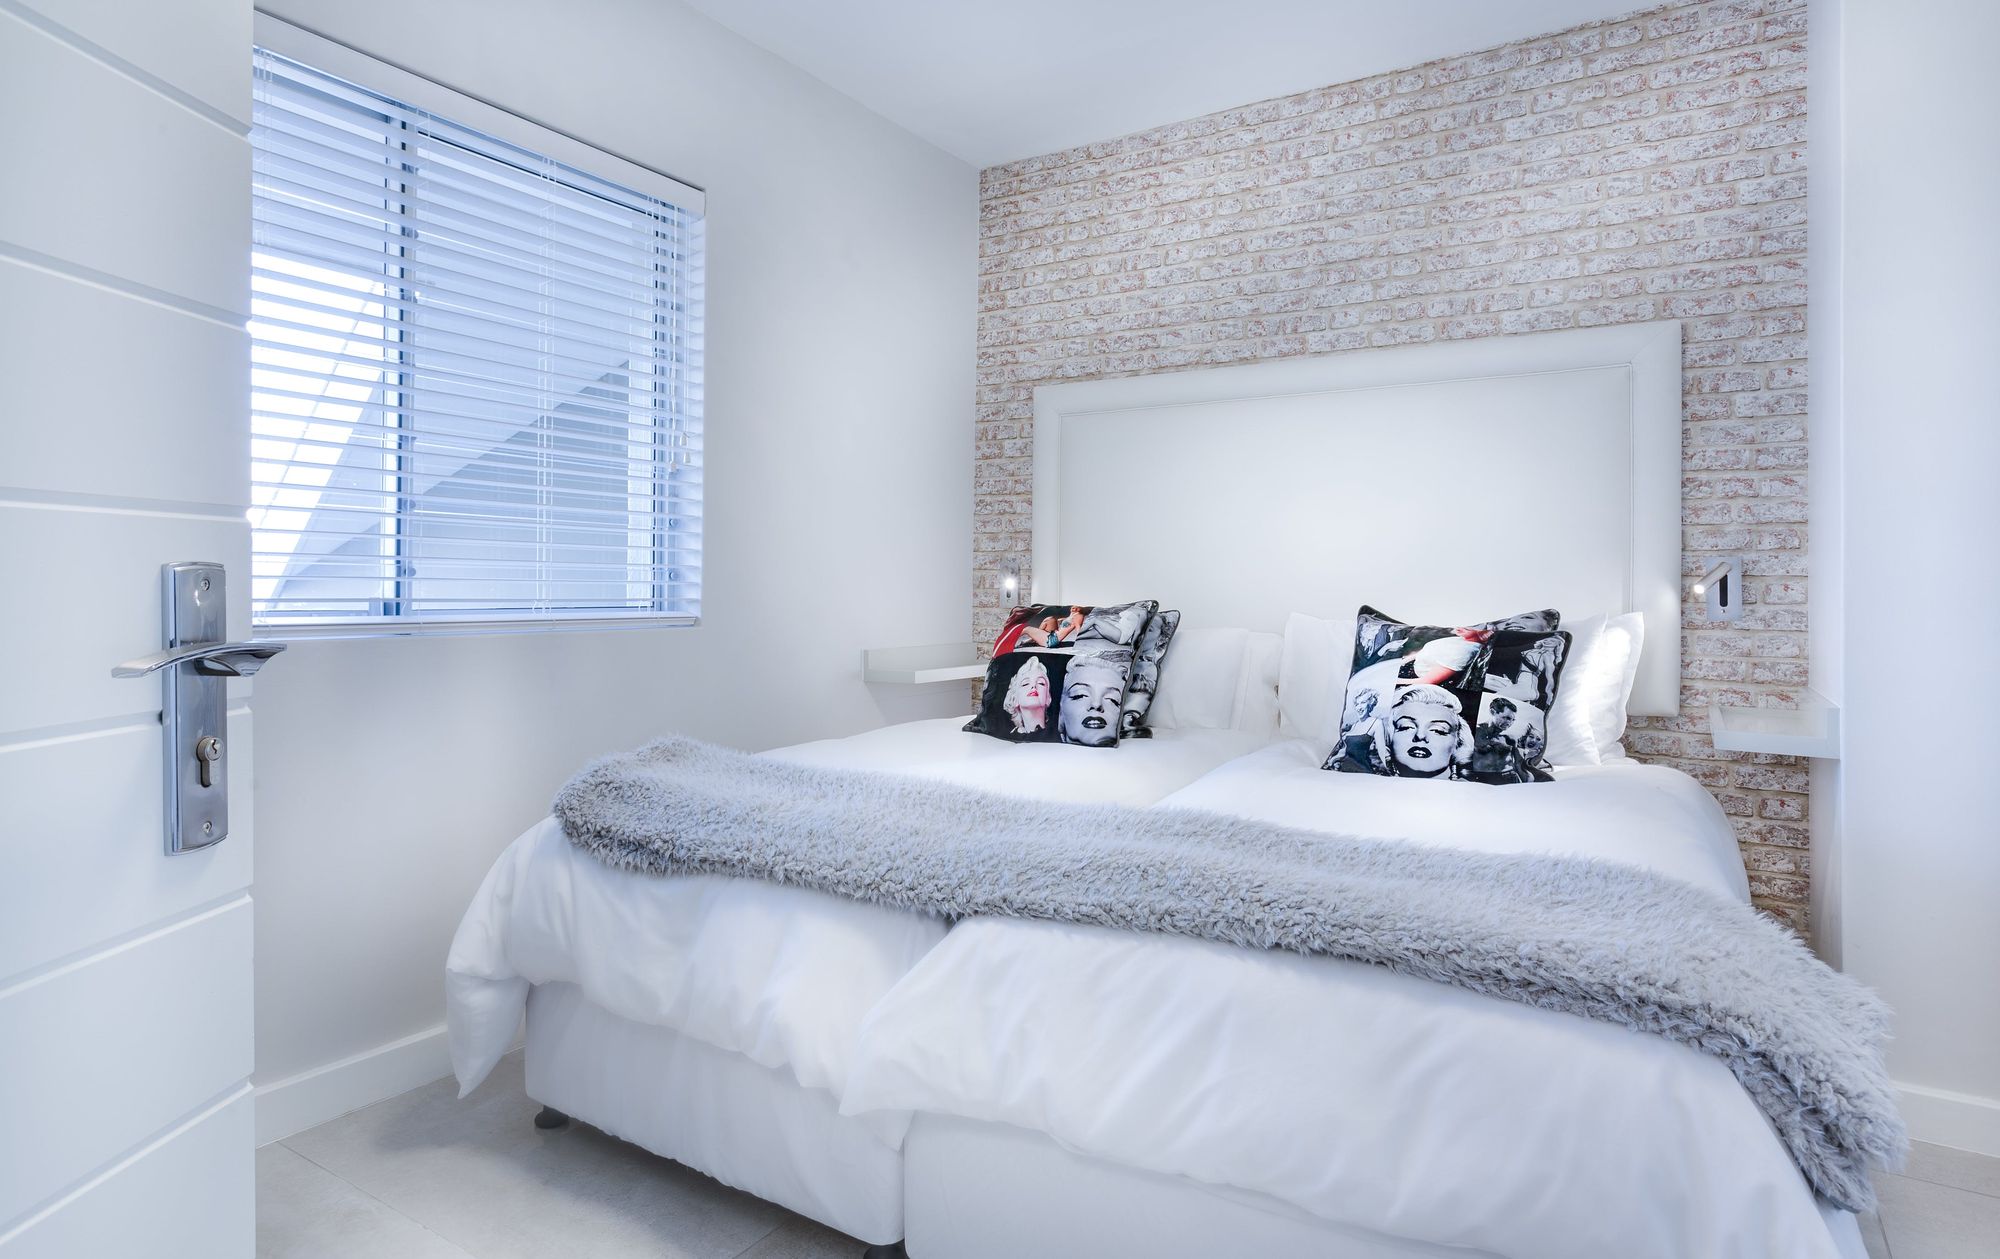 What Counts as a Bedroom in Property Listings?